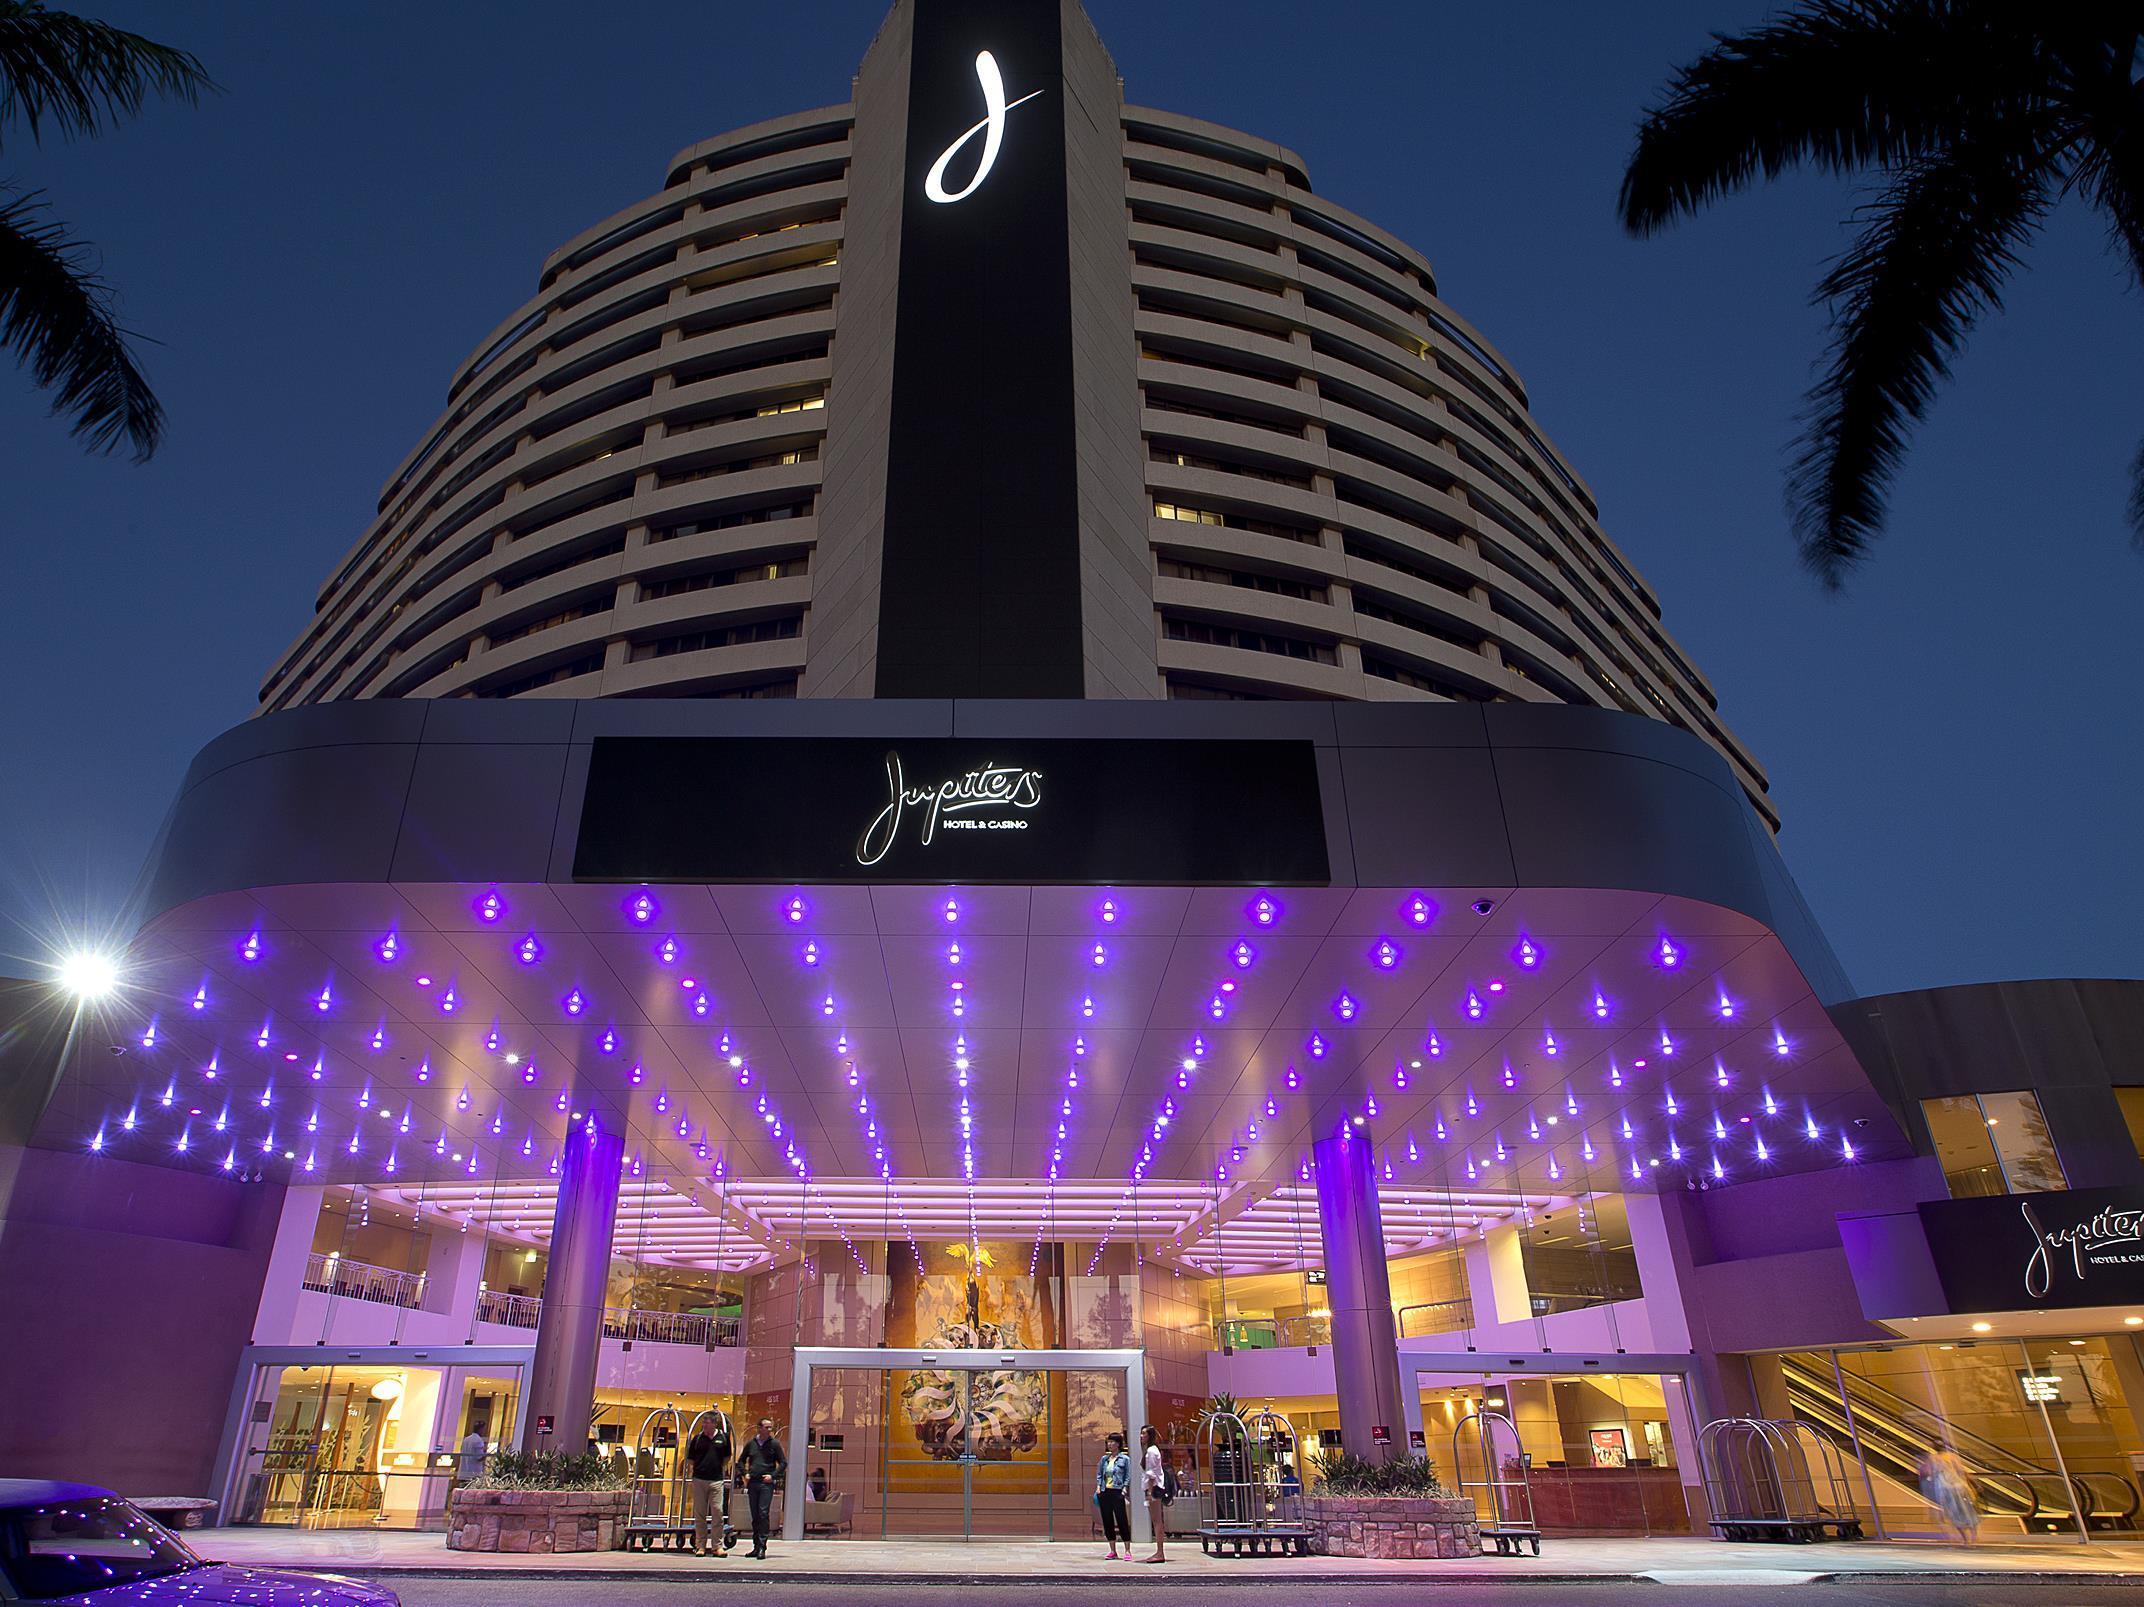 Jupiters Hotel and Casino Gold Coast FAQ 2017, What facilities are there in Jupiters Hotel and Casino Gold Coast 2017, What Languages Spoken are Supported in Jupiters Hotel and Casino Gold Coast 2017, Which payment cards are accepted in Jupiters Hotel and Casino Gold Coast , Gold Coast Jupiters Hotel and Casino room facilities and services Q&A 2017, Gold Coast Jupiters Hotel and Casino online booking services 2017, Gold Coast Jupiters Hotel and Casino address 2017, Gold Coast Jupiters Hotel and Casino telephone number 2017,Gold Coast Jupiters Hotel and Casino map 2017, Gold Coast Jupiters Hotel and Casino traffic guide 2017, how to go Gold Coast Jupiters Hotel and Casino, Gold Coast Jupiters Hotel and Casino booking online 2017, Gold Coast Jupiters Hotel and Casino room types 2017.